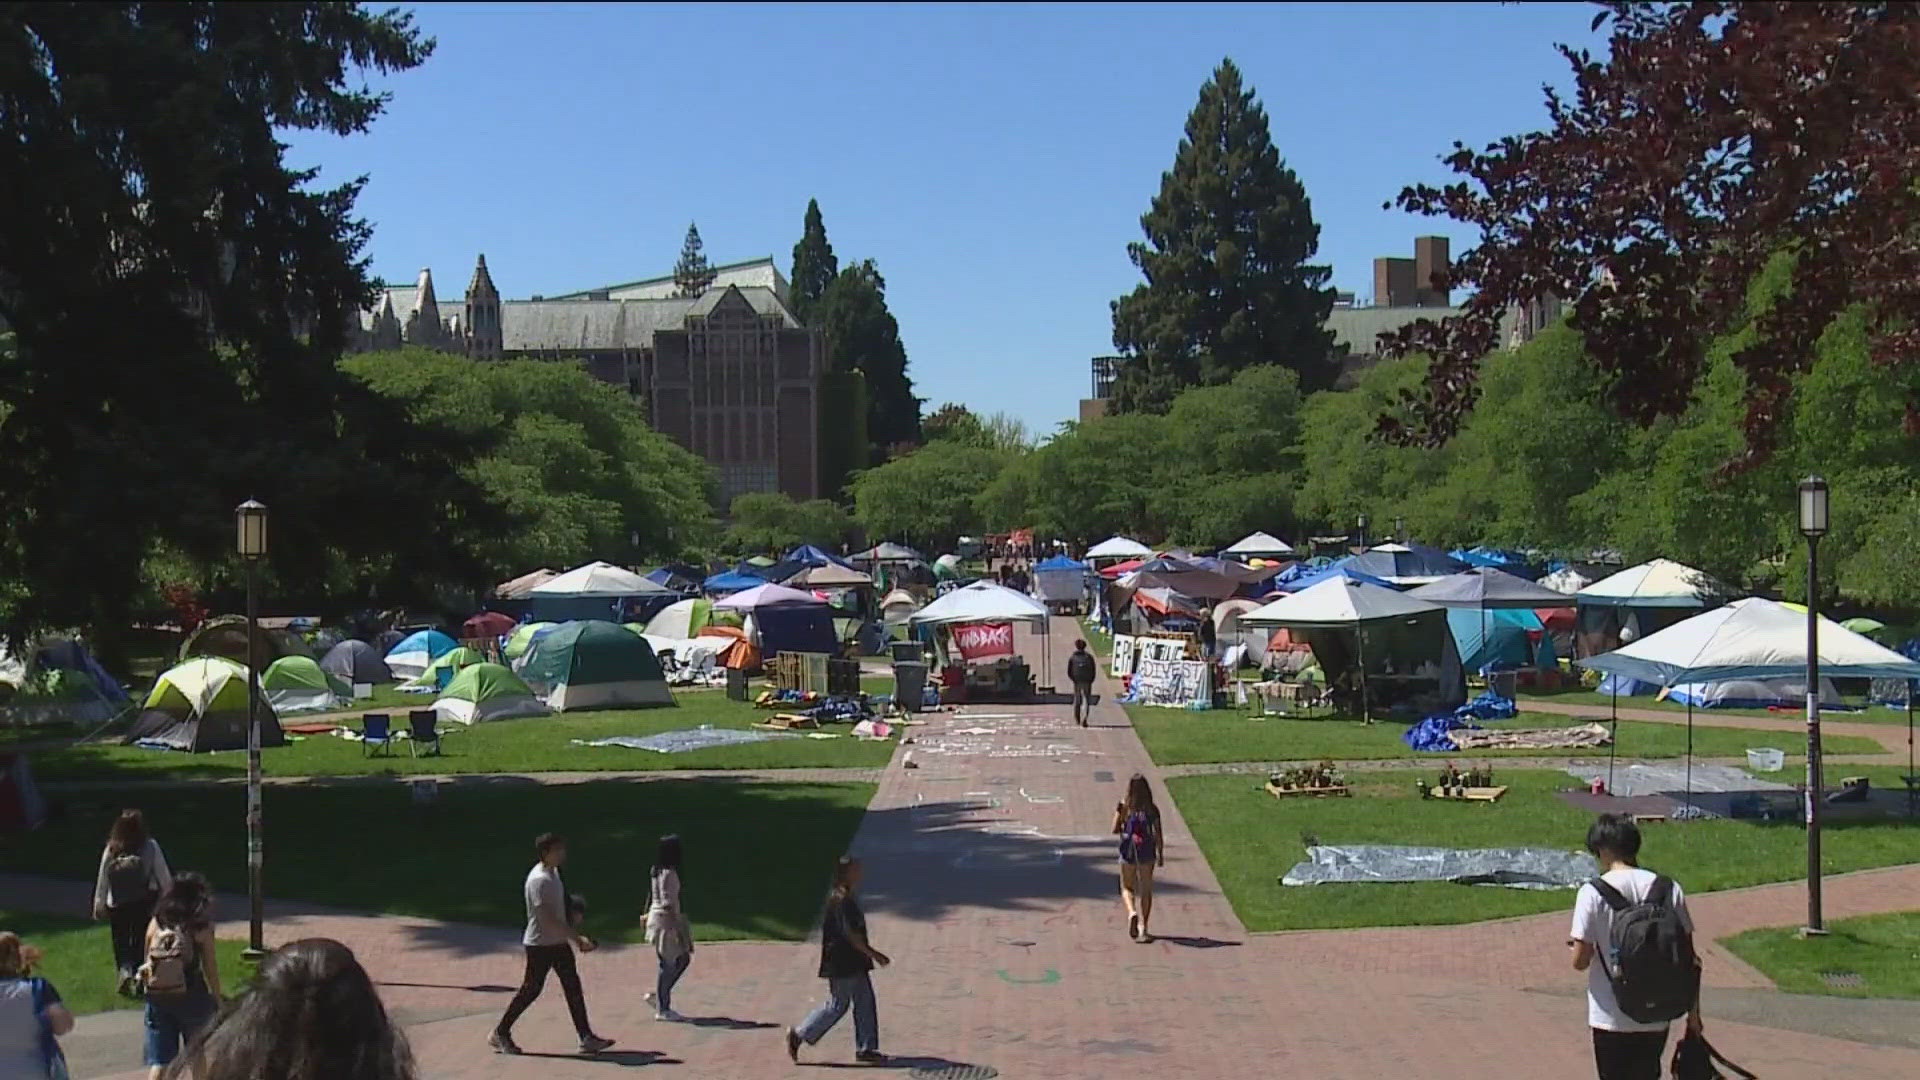 After the deal, the UW gave the protesters a deadline to clear the lawn.